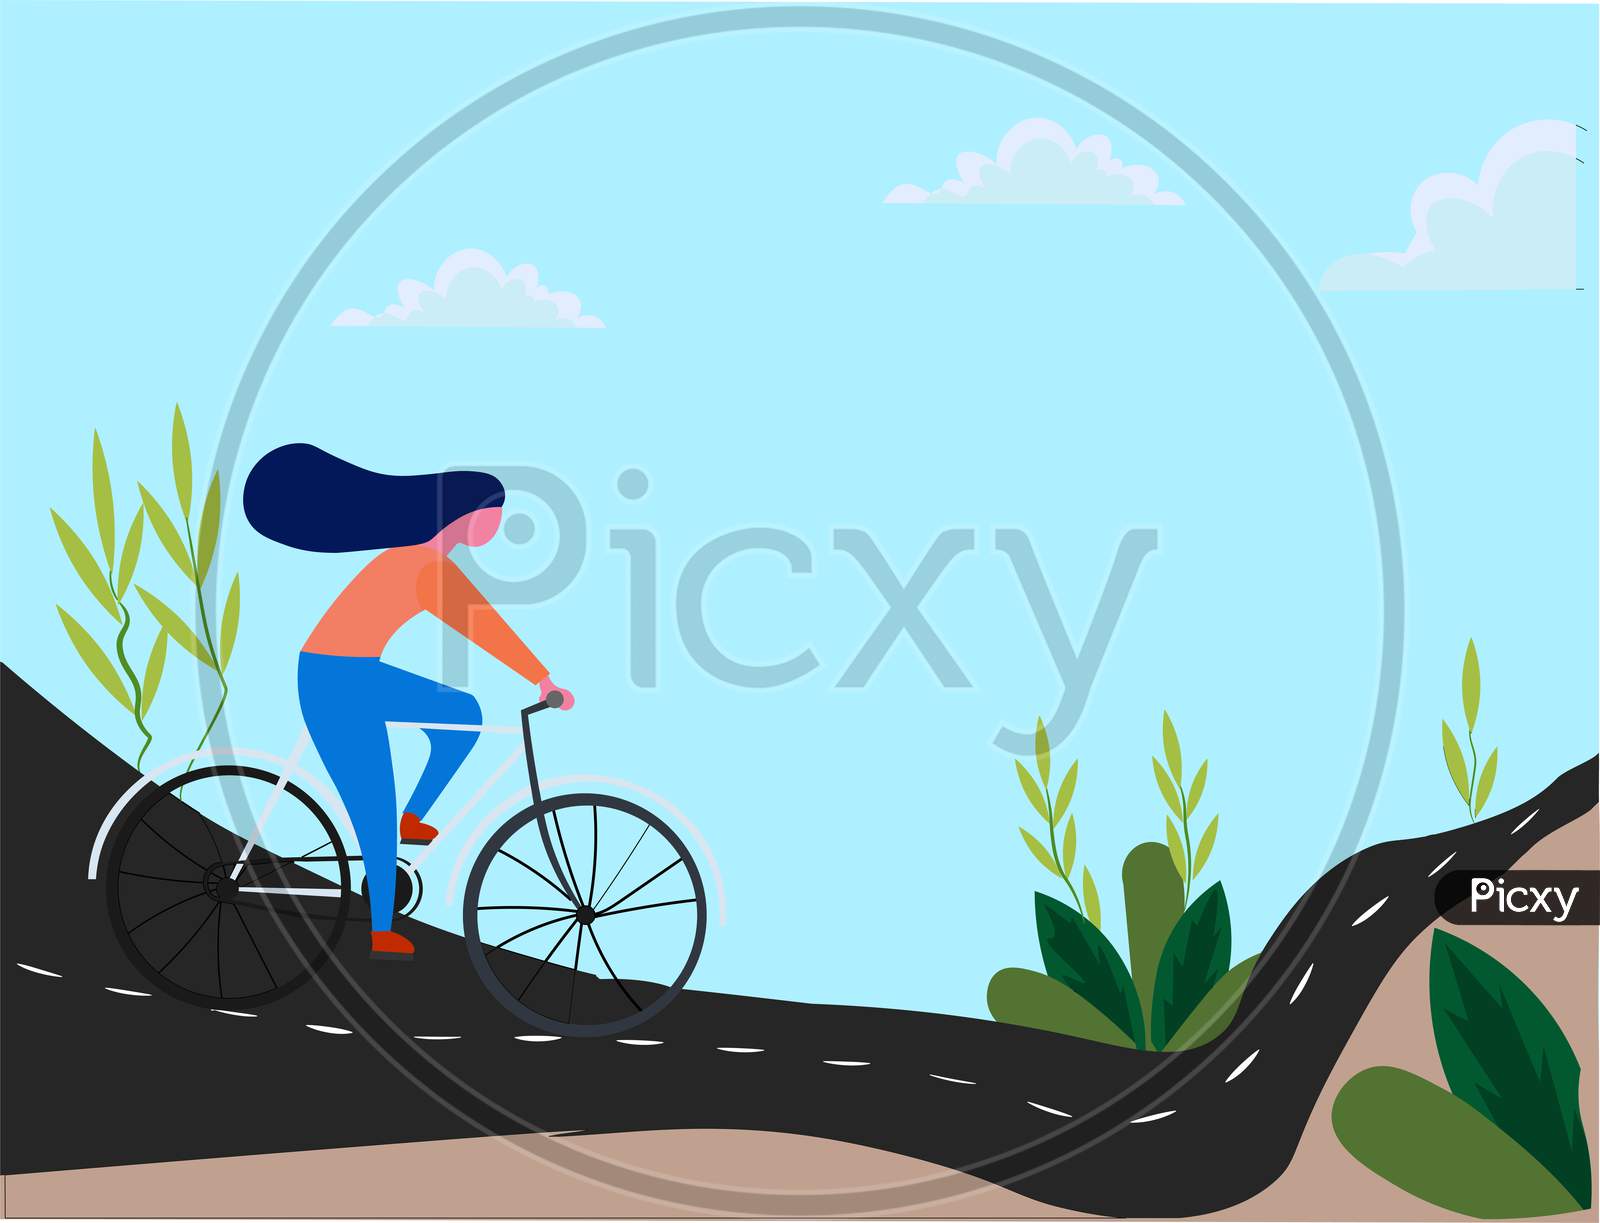 An illustration of a girl riding bicycle